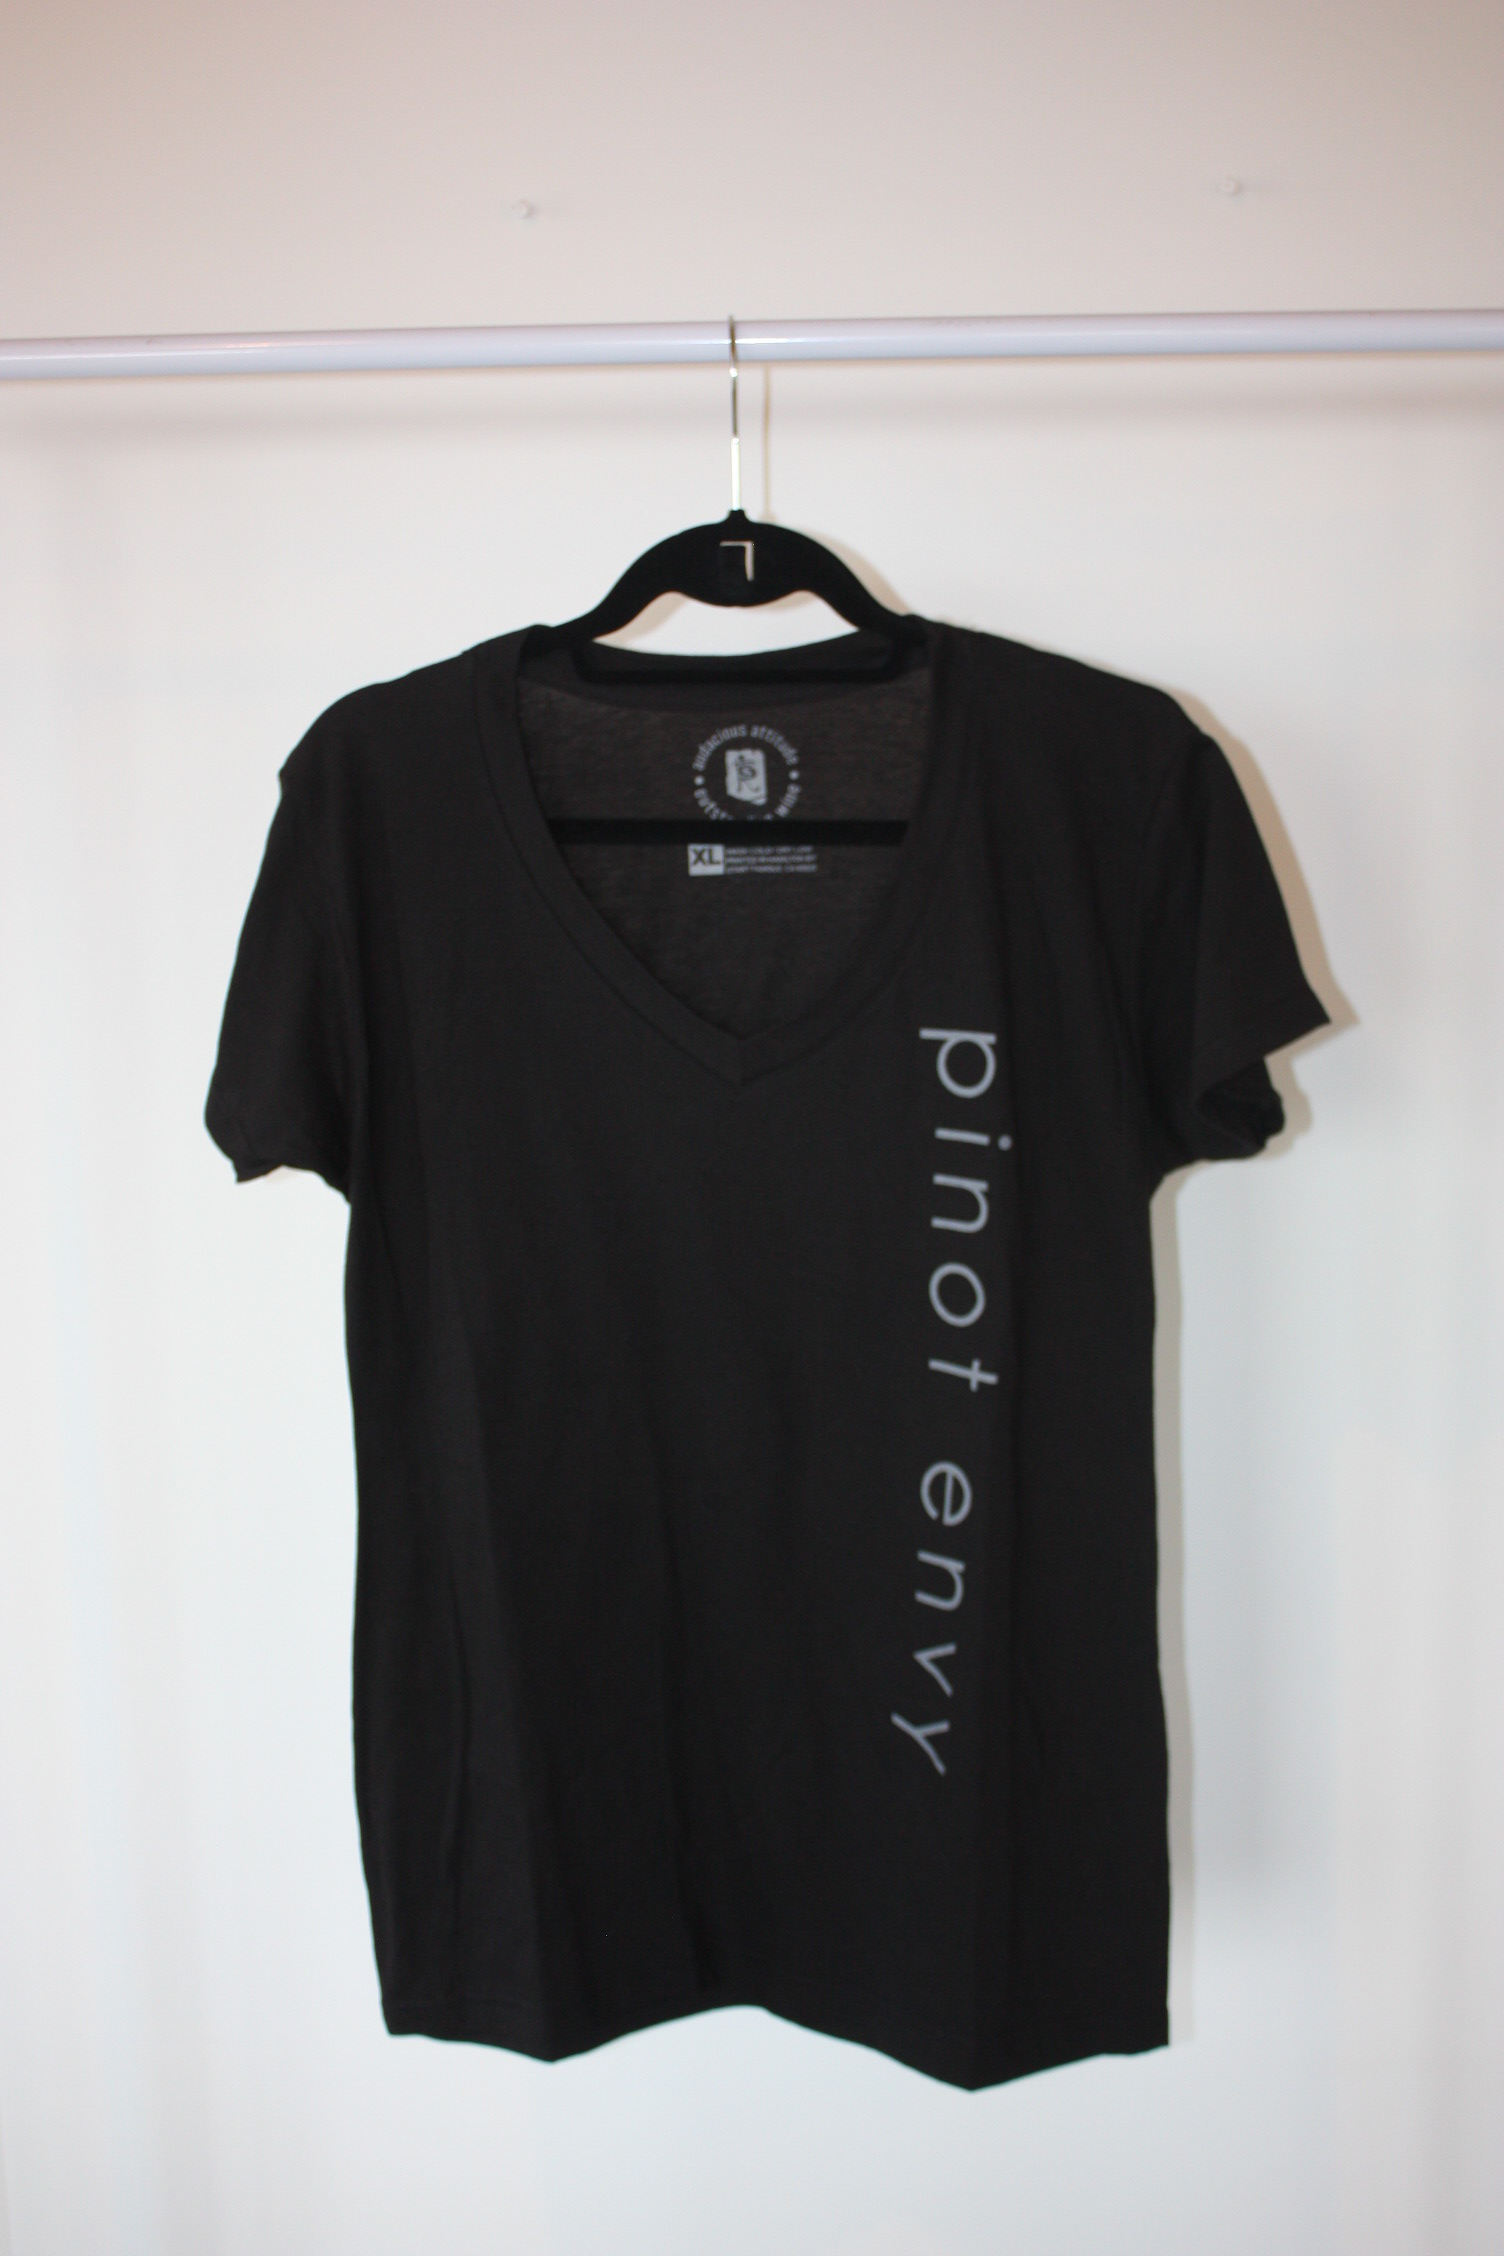 Product Image for Pinot Envy Women's T-Shirt